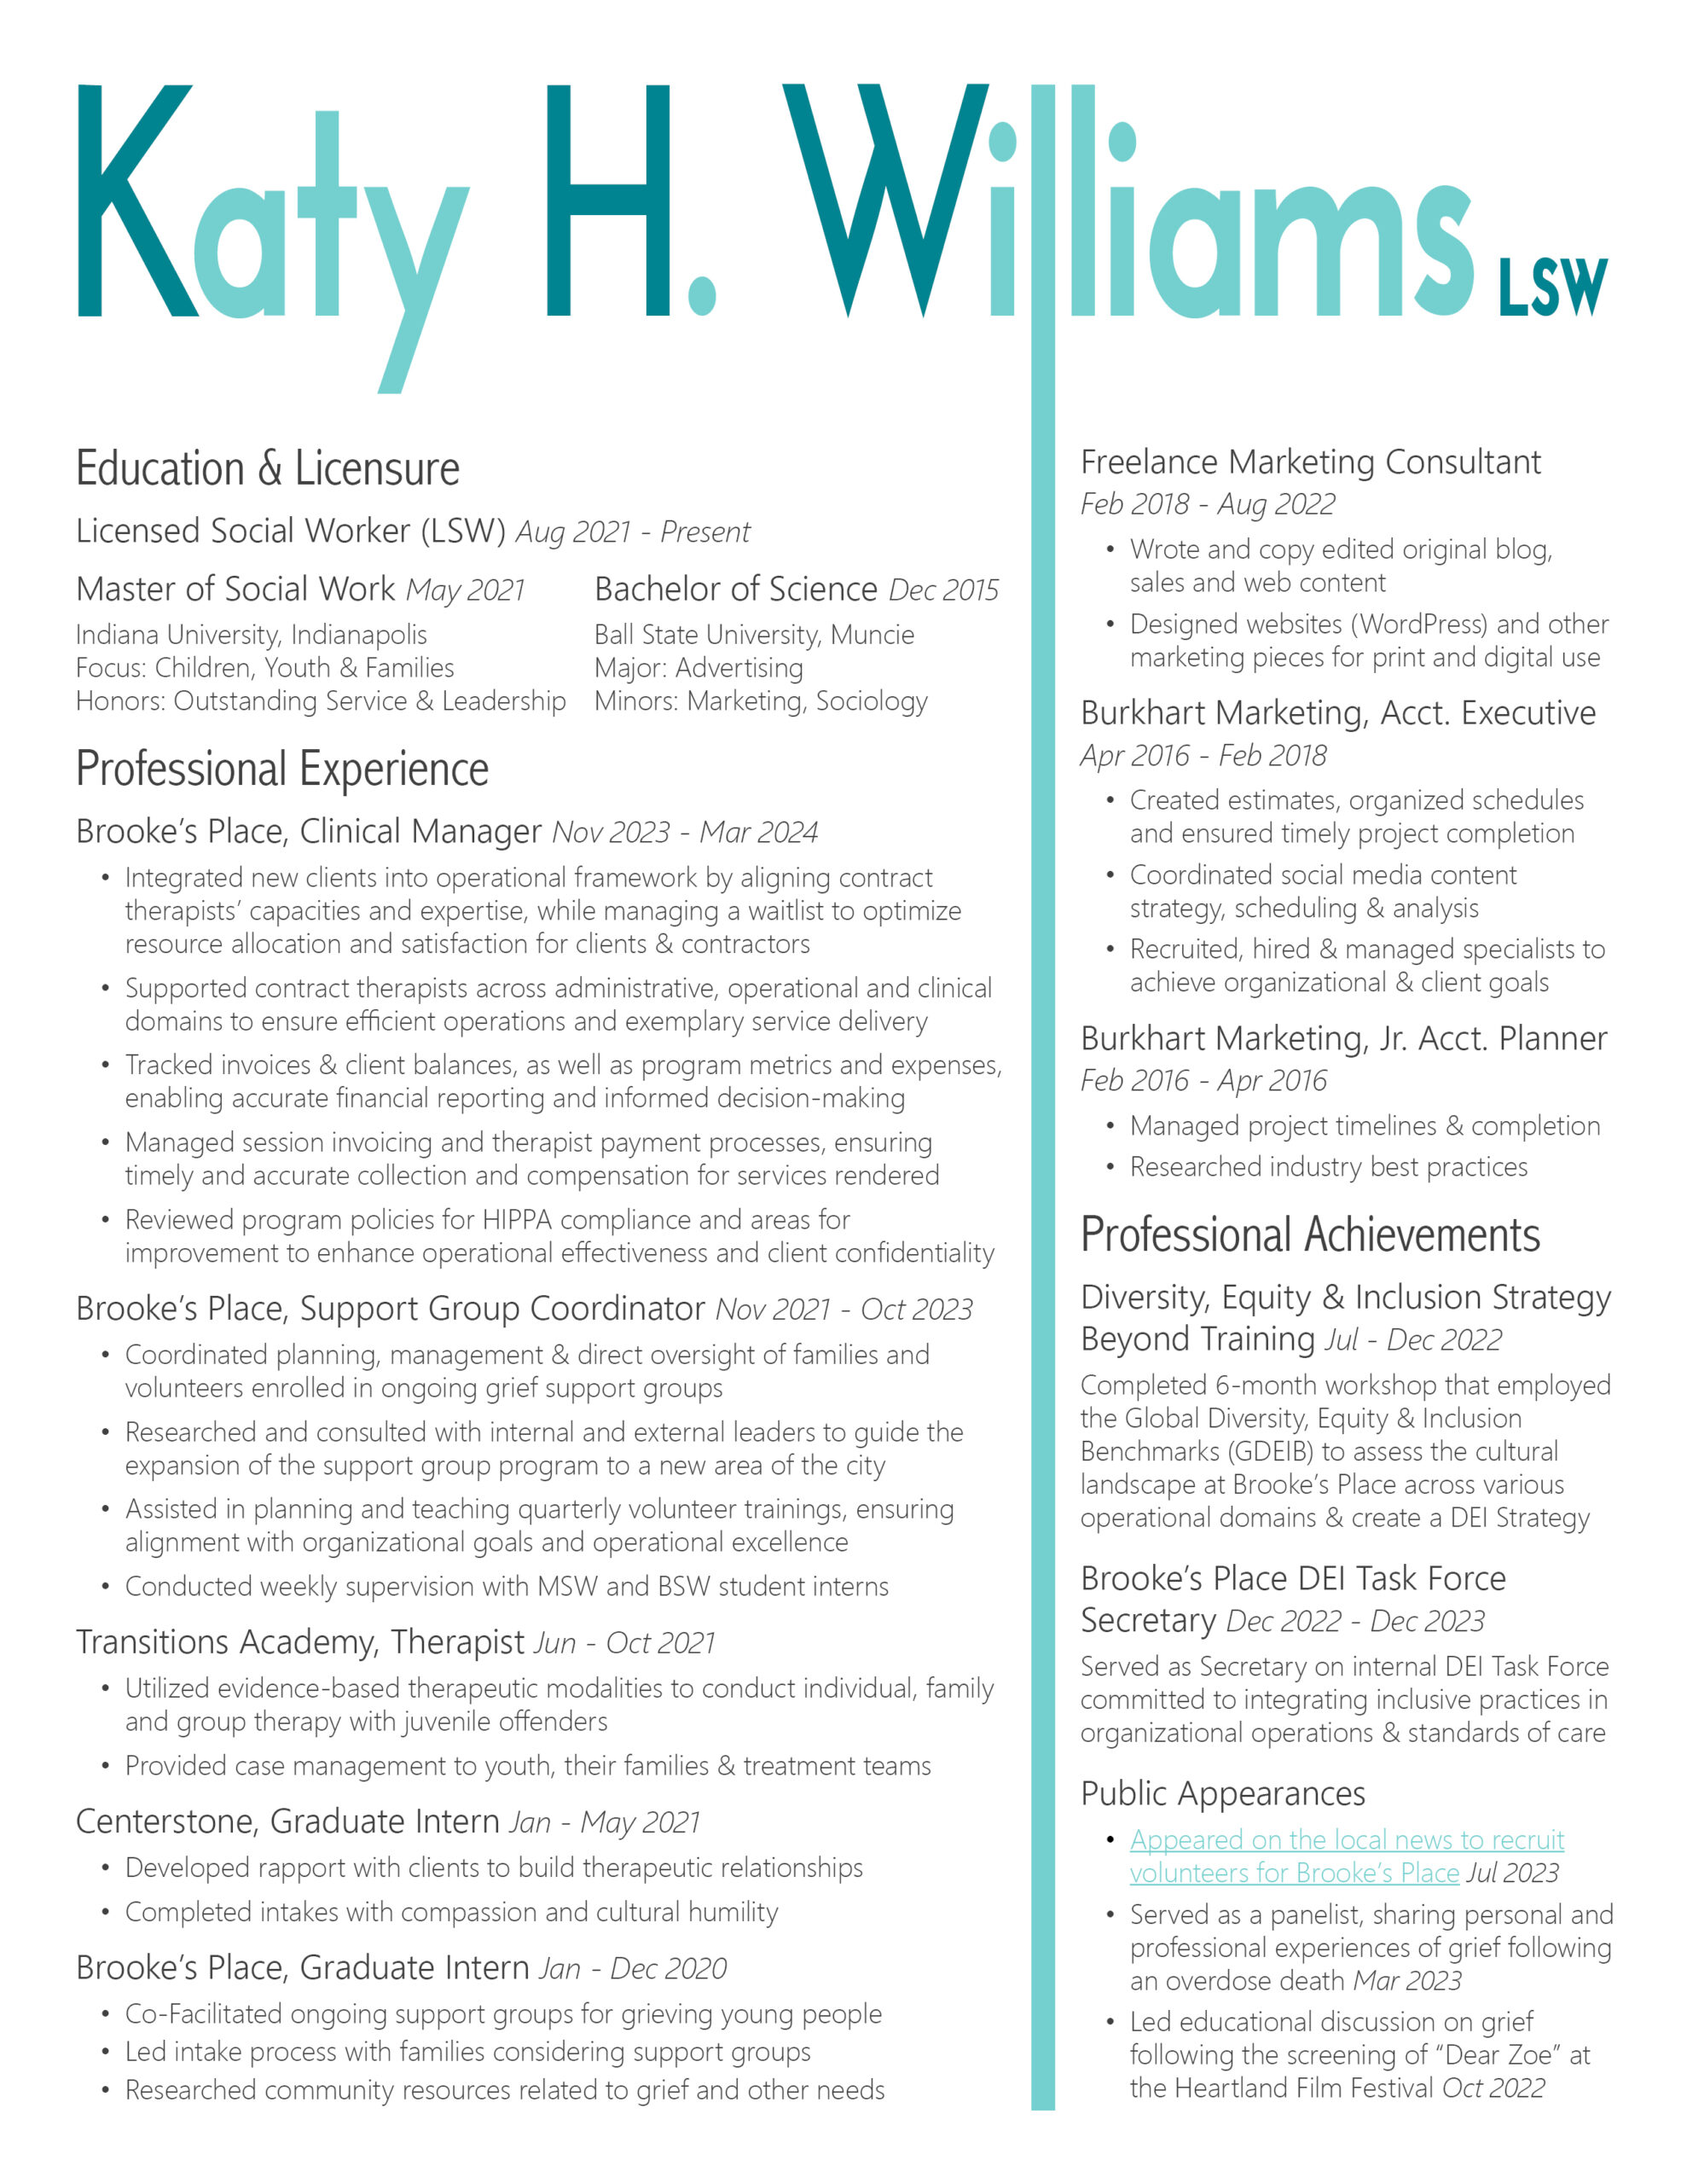 Resume of Indianapolis social worker, Katy Williams, including Education & Licensure, Professional Experience, and Professional Achievements